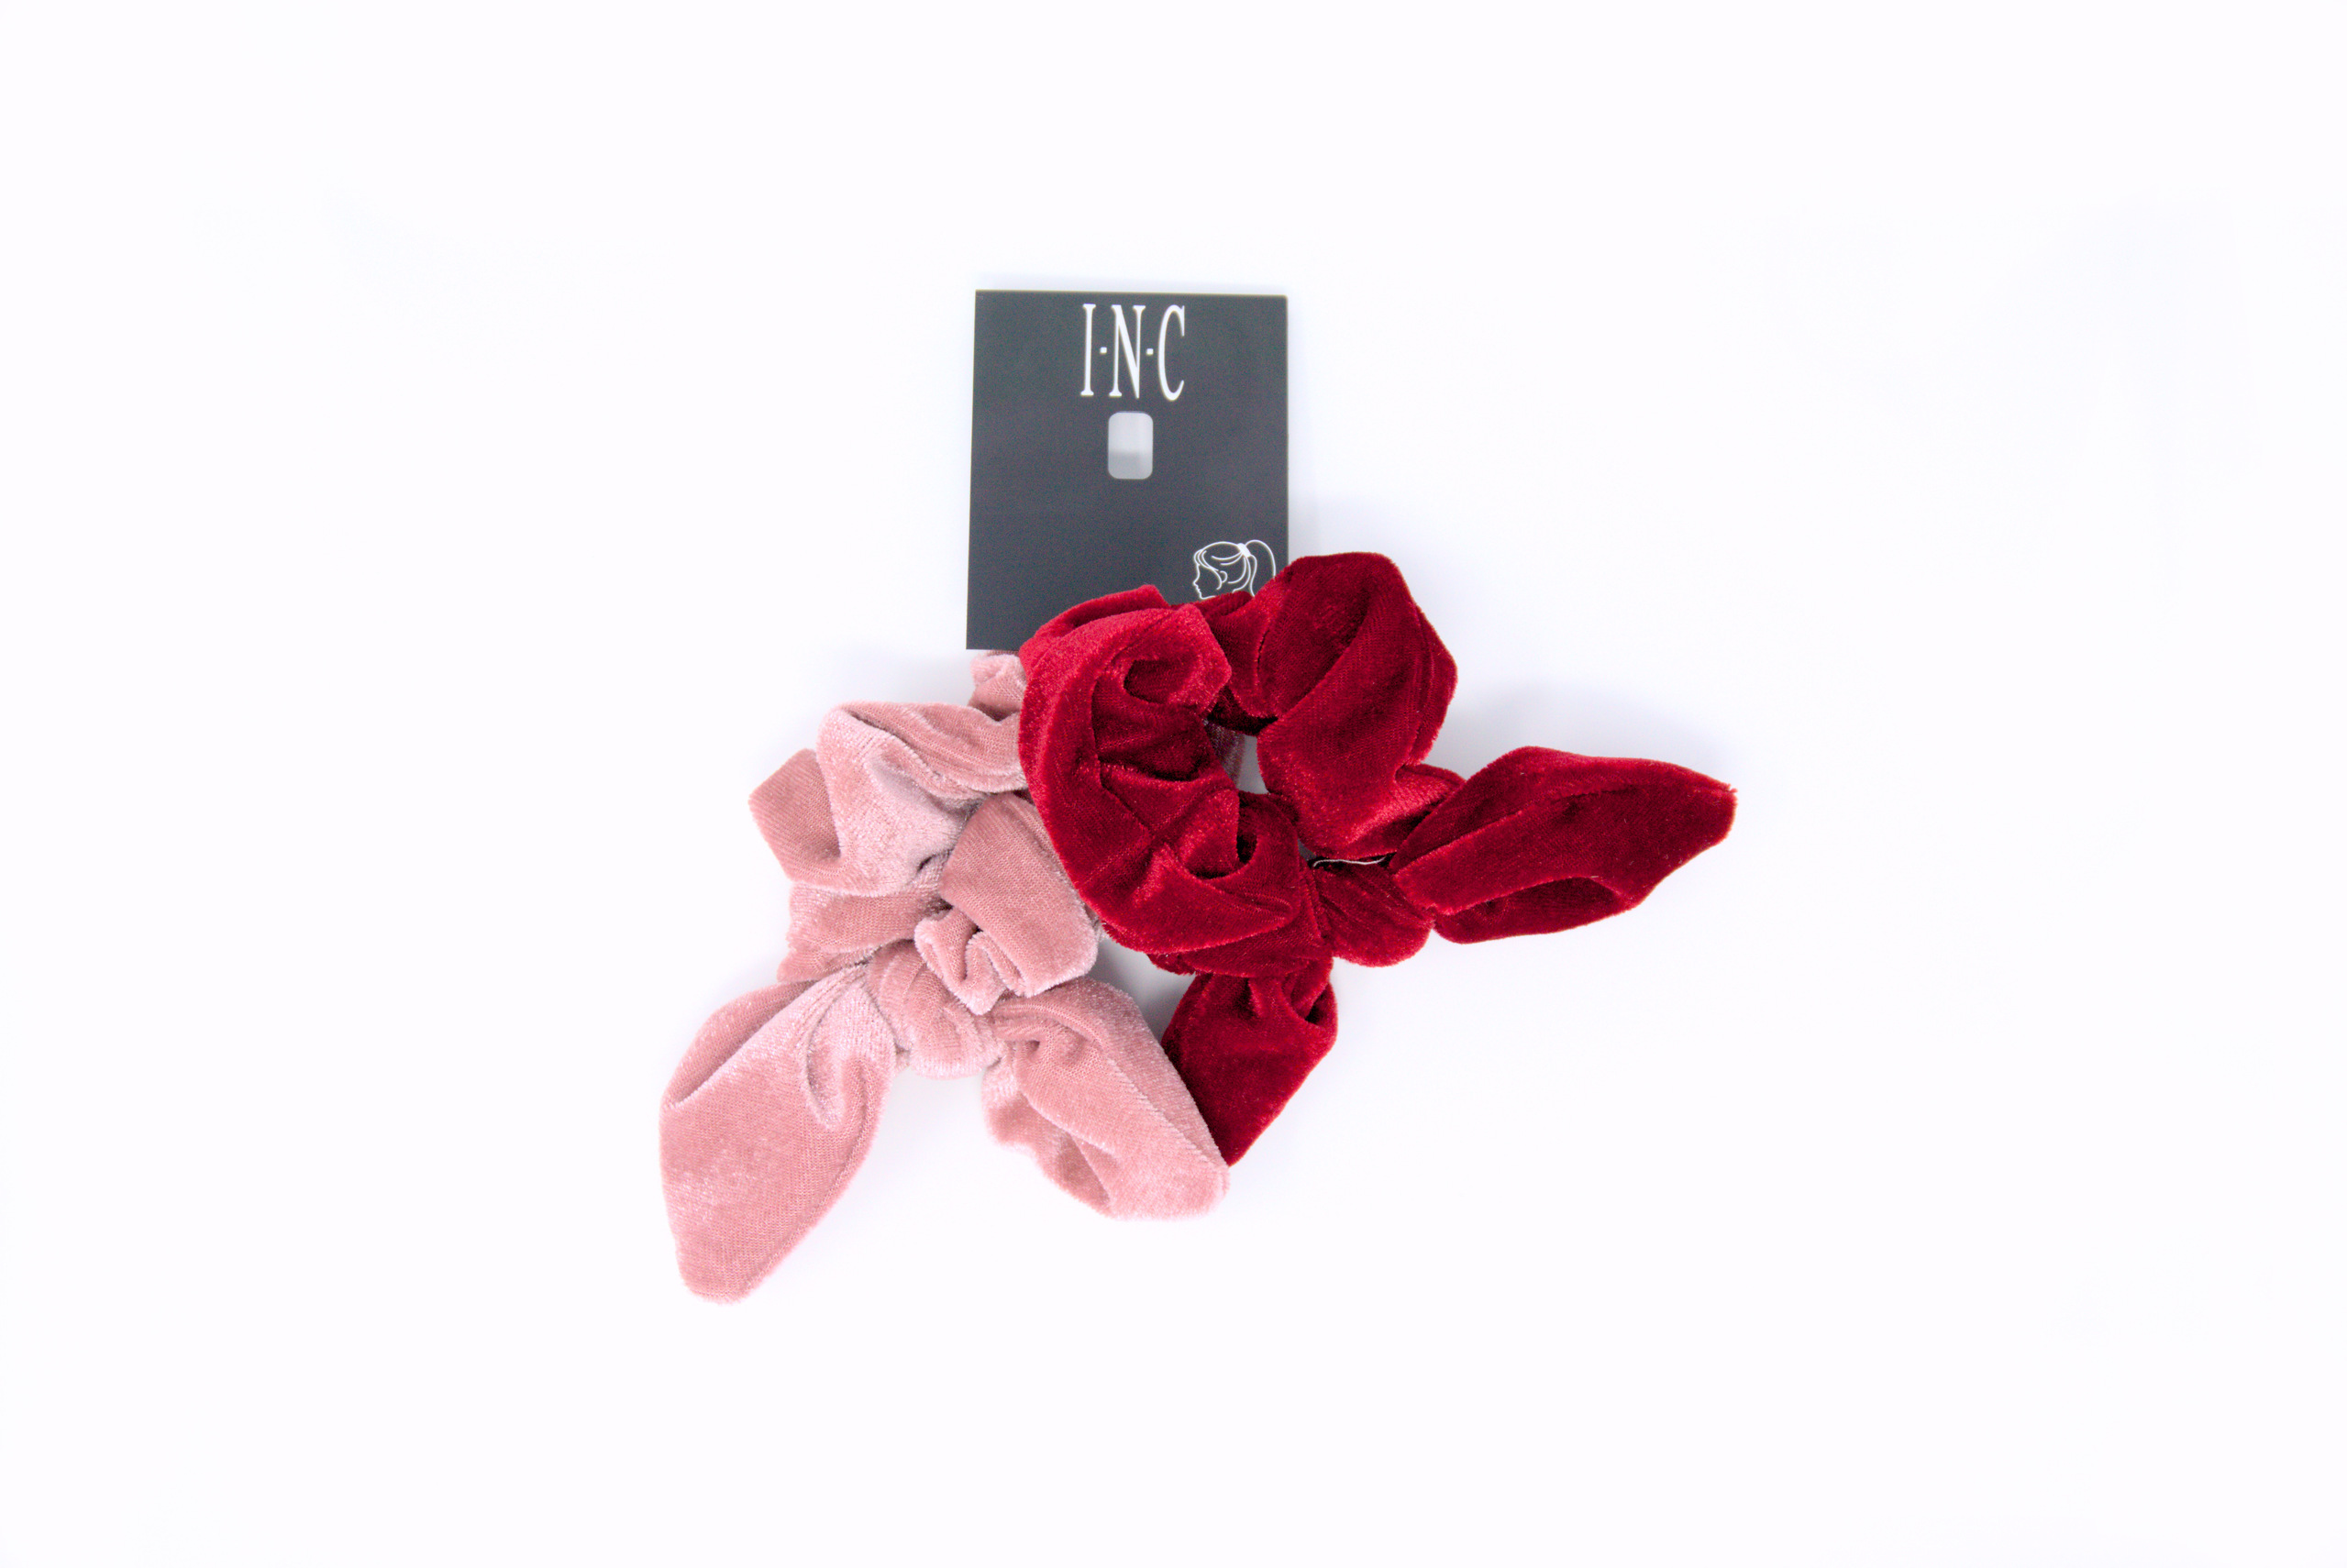 Charm & Lovely Quality fFashion Accessories, introduces I.n.c. International Concepts Bow Hair Scrunchie Set - 2PC, Soft hair scrunchies each sport a bow design in this cute two-piece set from I.n.c. International Concepts